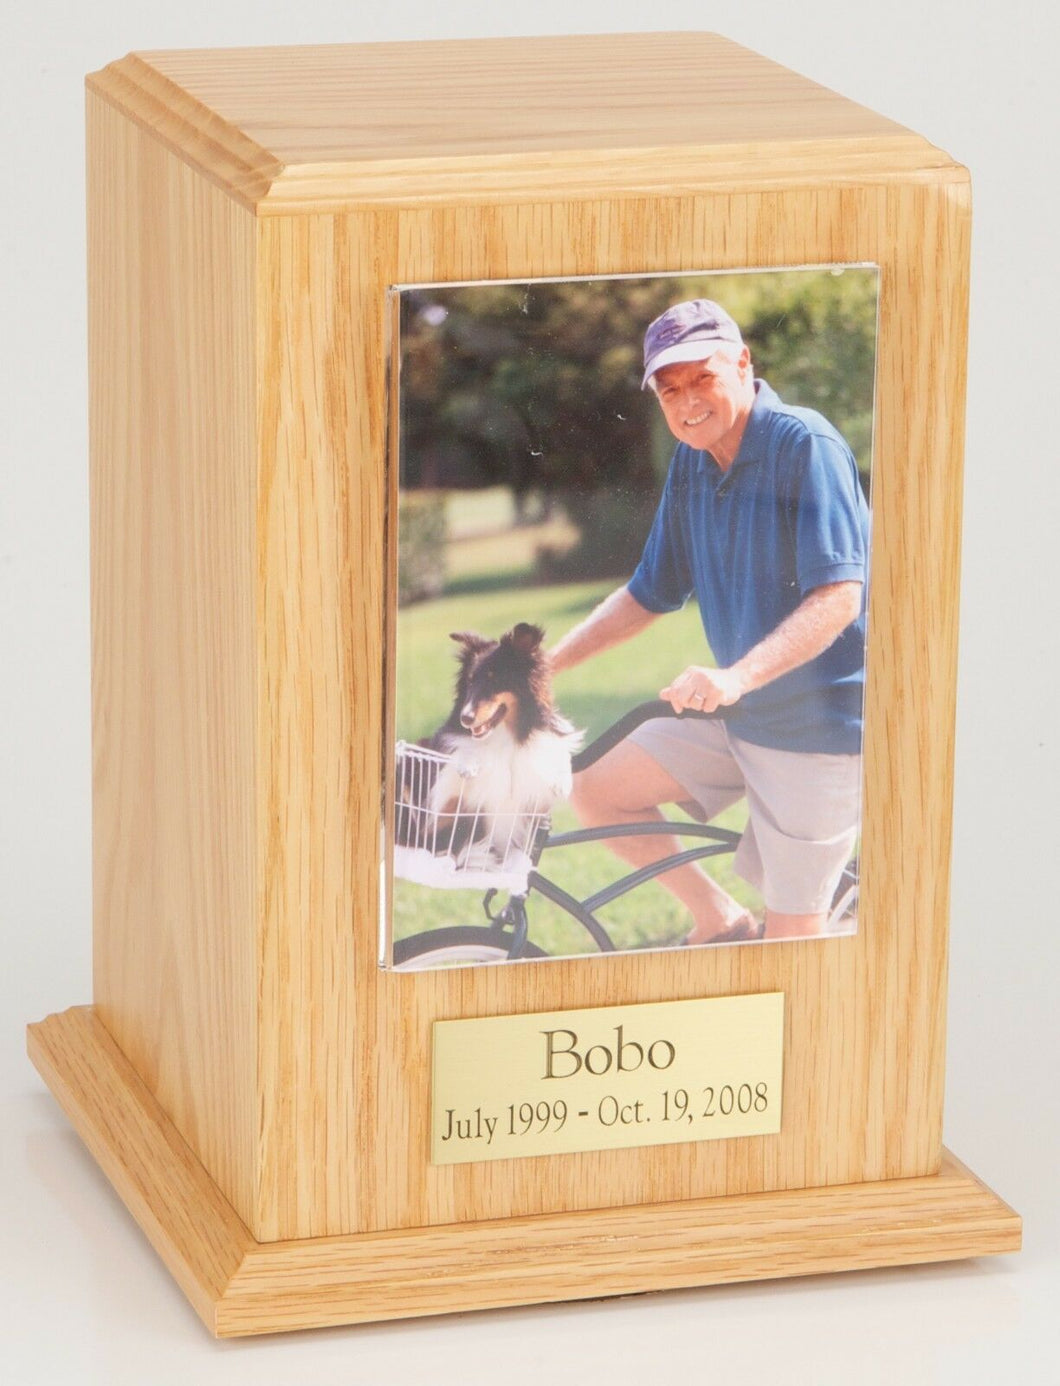 Large 240 Cubic Ins Oak Pet Tower Photo Urn for Ashes w/Engravable Nameplate